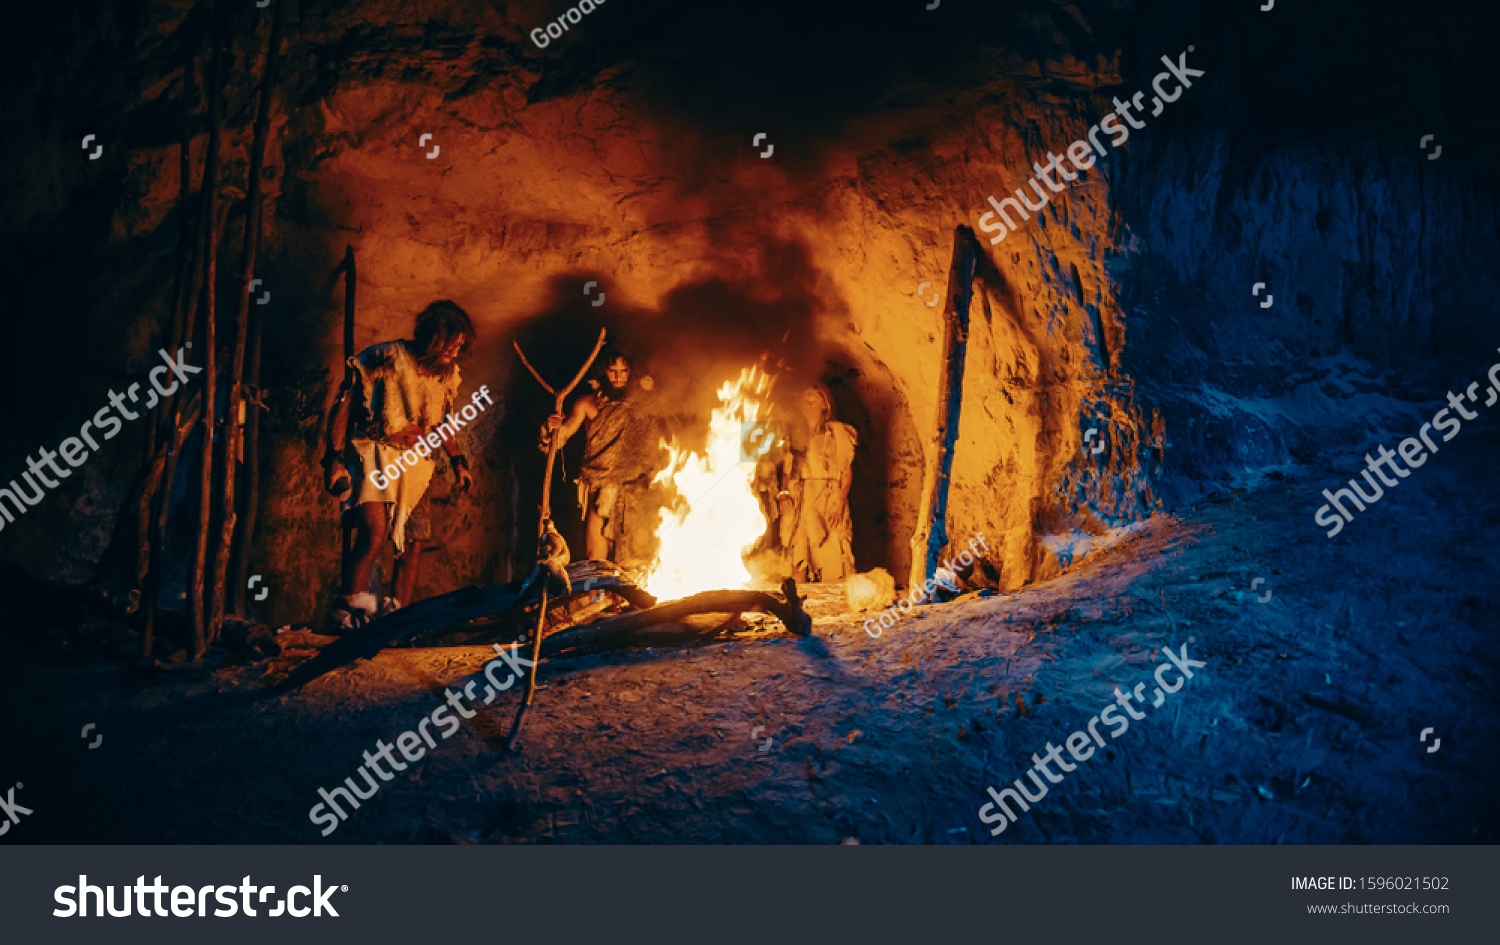 Tribe of Prehistoric Hunter-Gatherers Wearing Animal Skins Stand Around Bonfire Outside of Cave at Night. Portrait of Neanderthal / Homo Sapiens Family Doing Pagan Religion Ritual Near Fire #1596021502